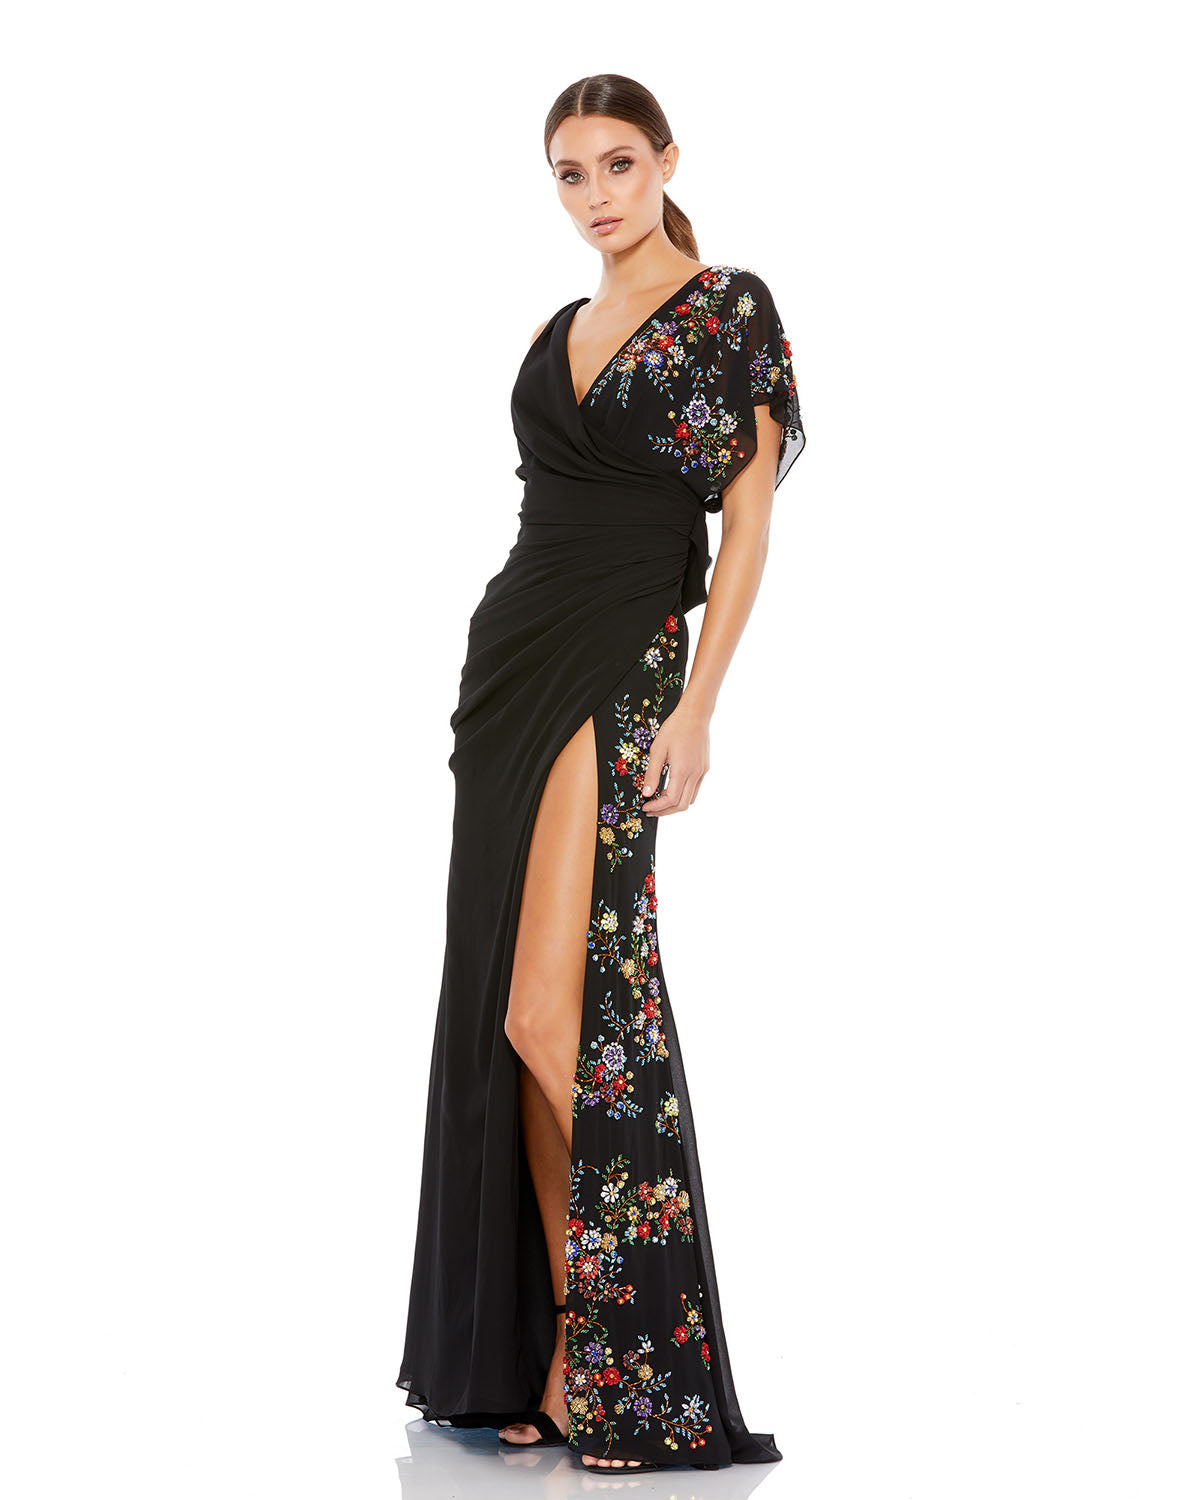 Mac Duggal, FAUX WRAP MULTI COLORED BEADED FLORAL GOWN Regular price